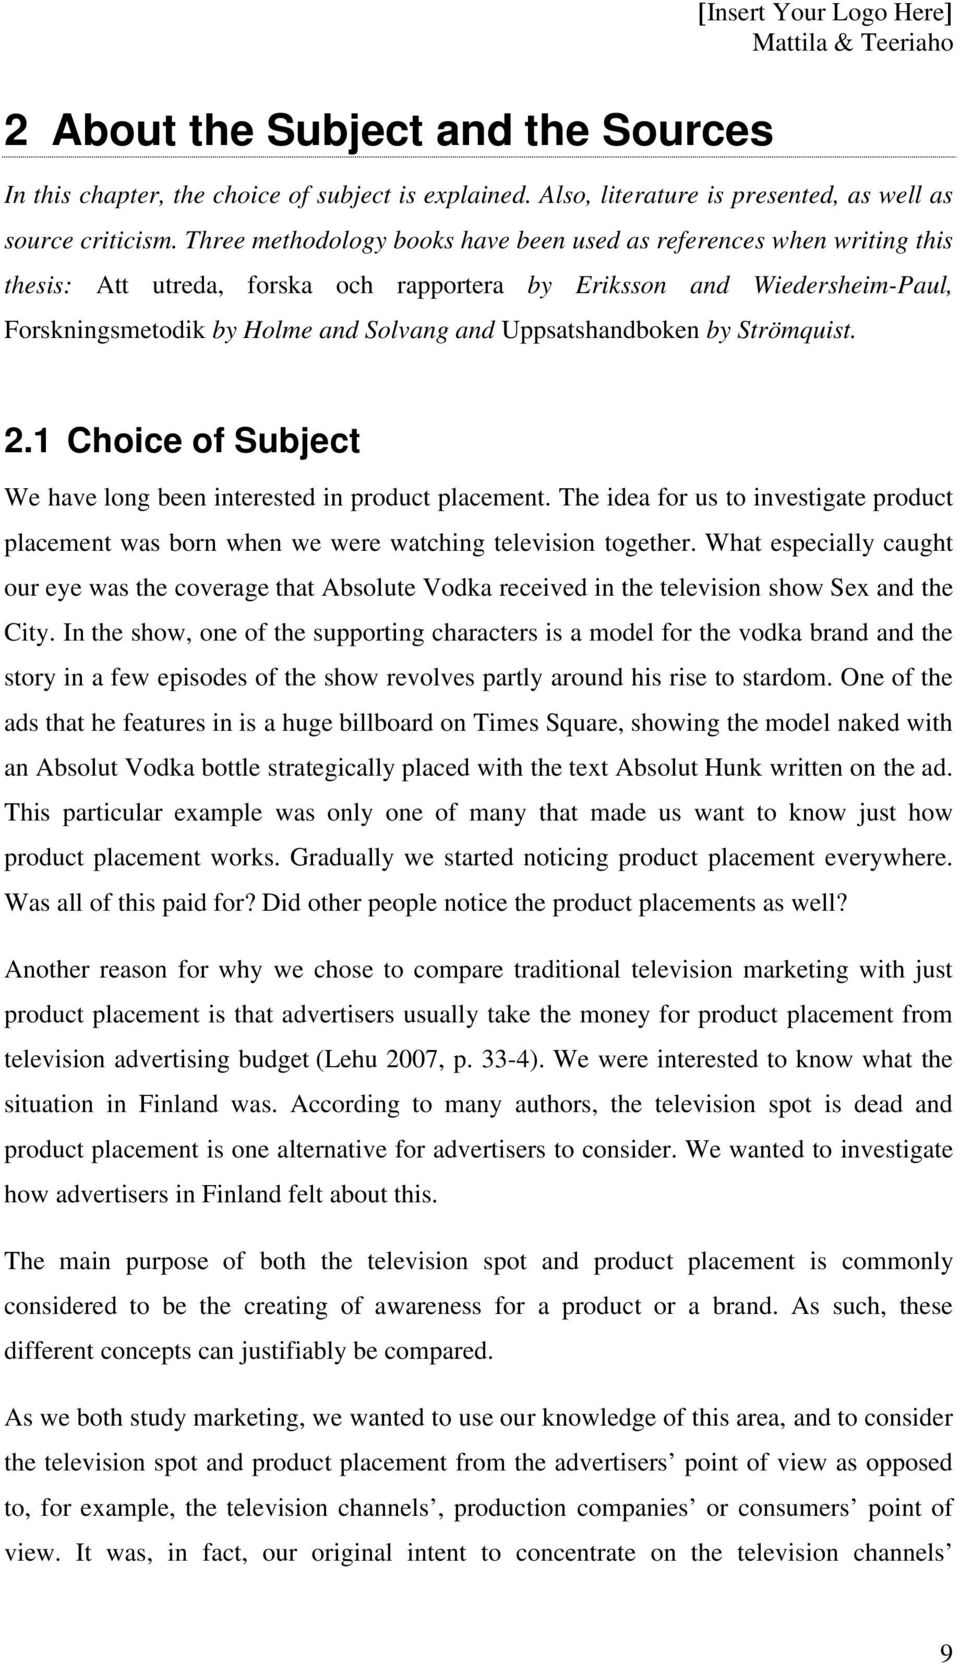 Uppsatshandboken by Strömquist. 2.1 Choice of Subject We have long been interested in product placement.